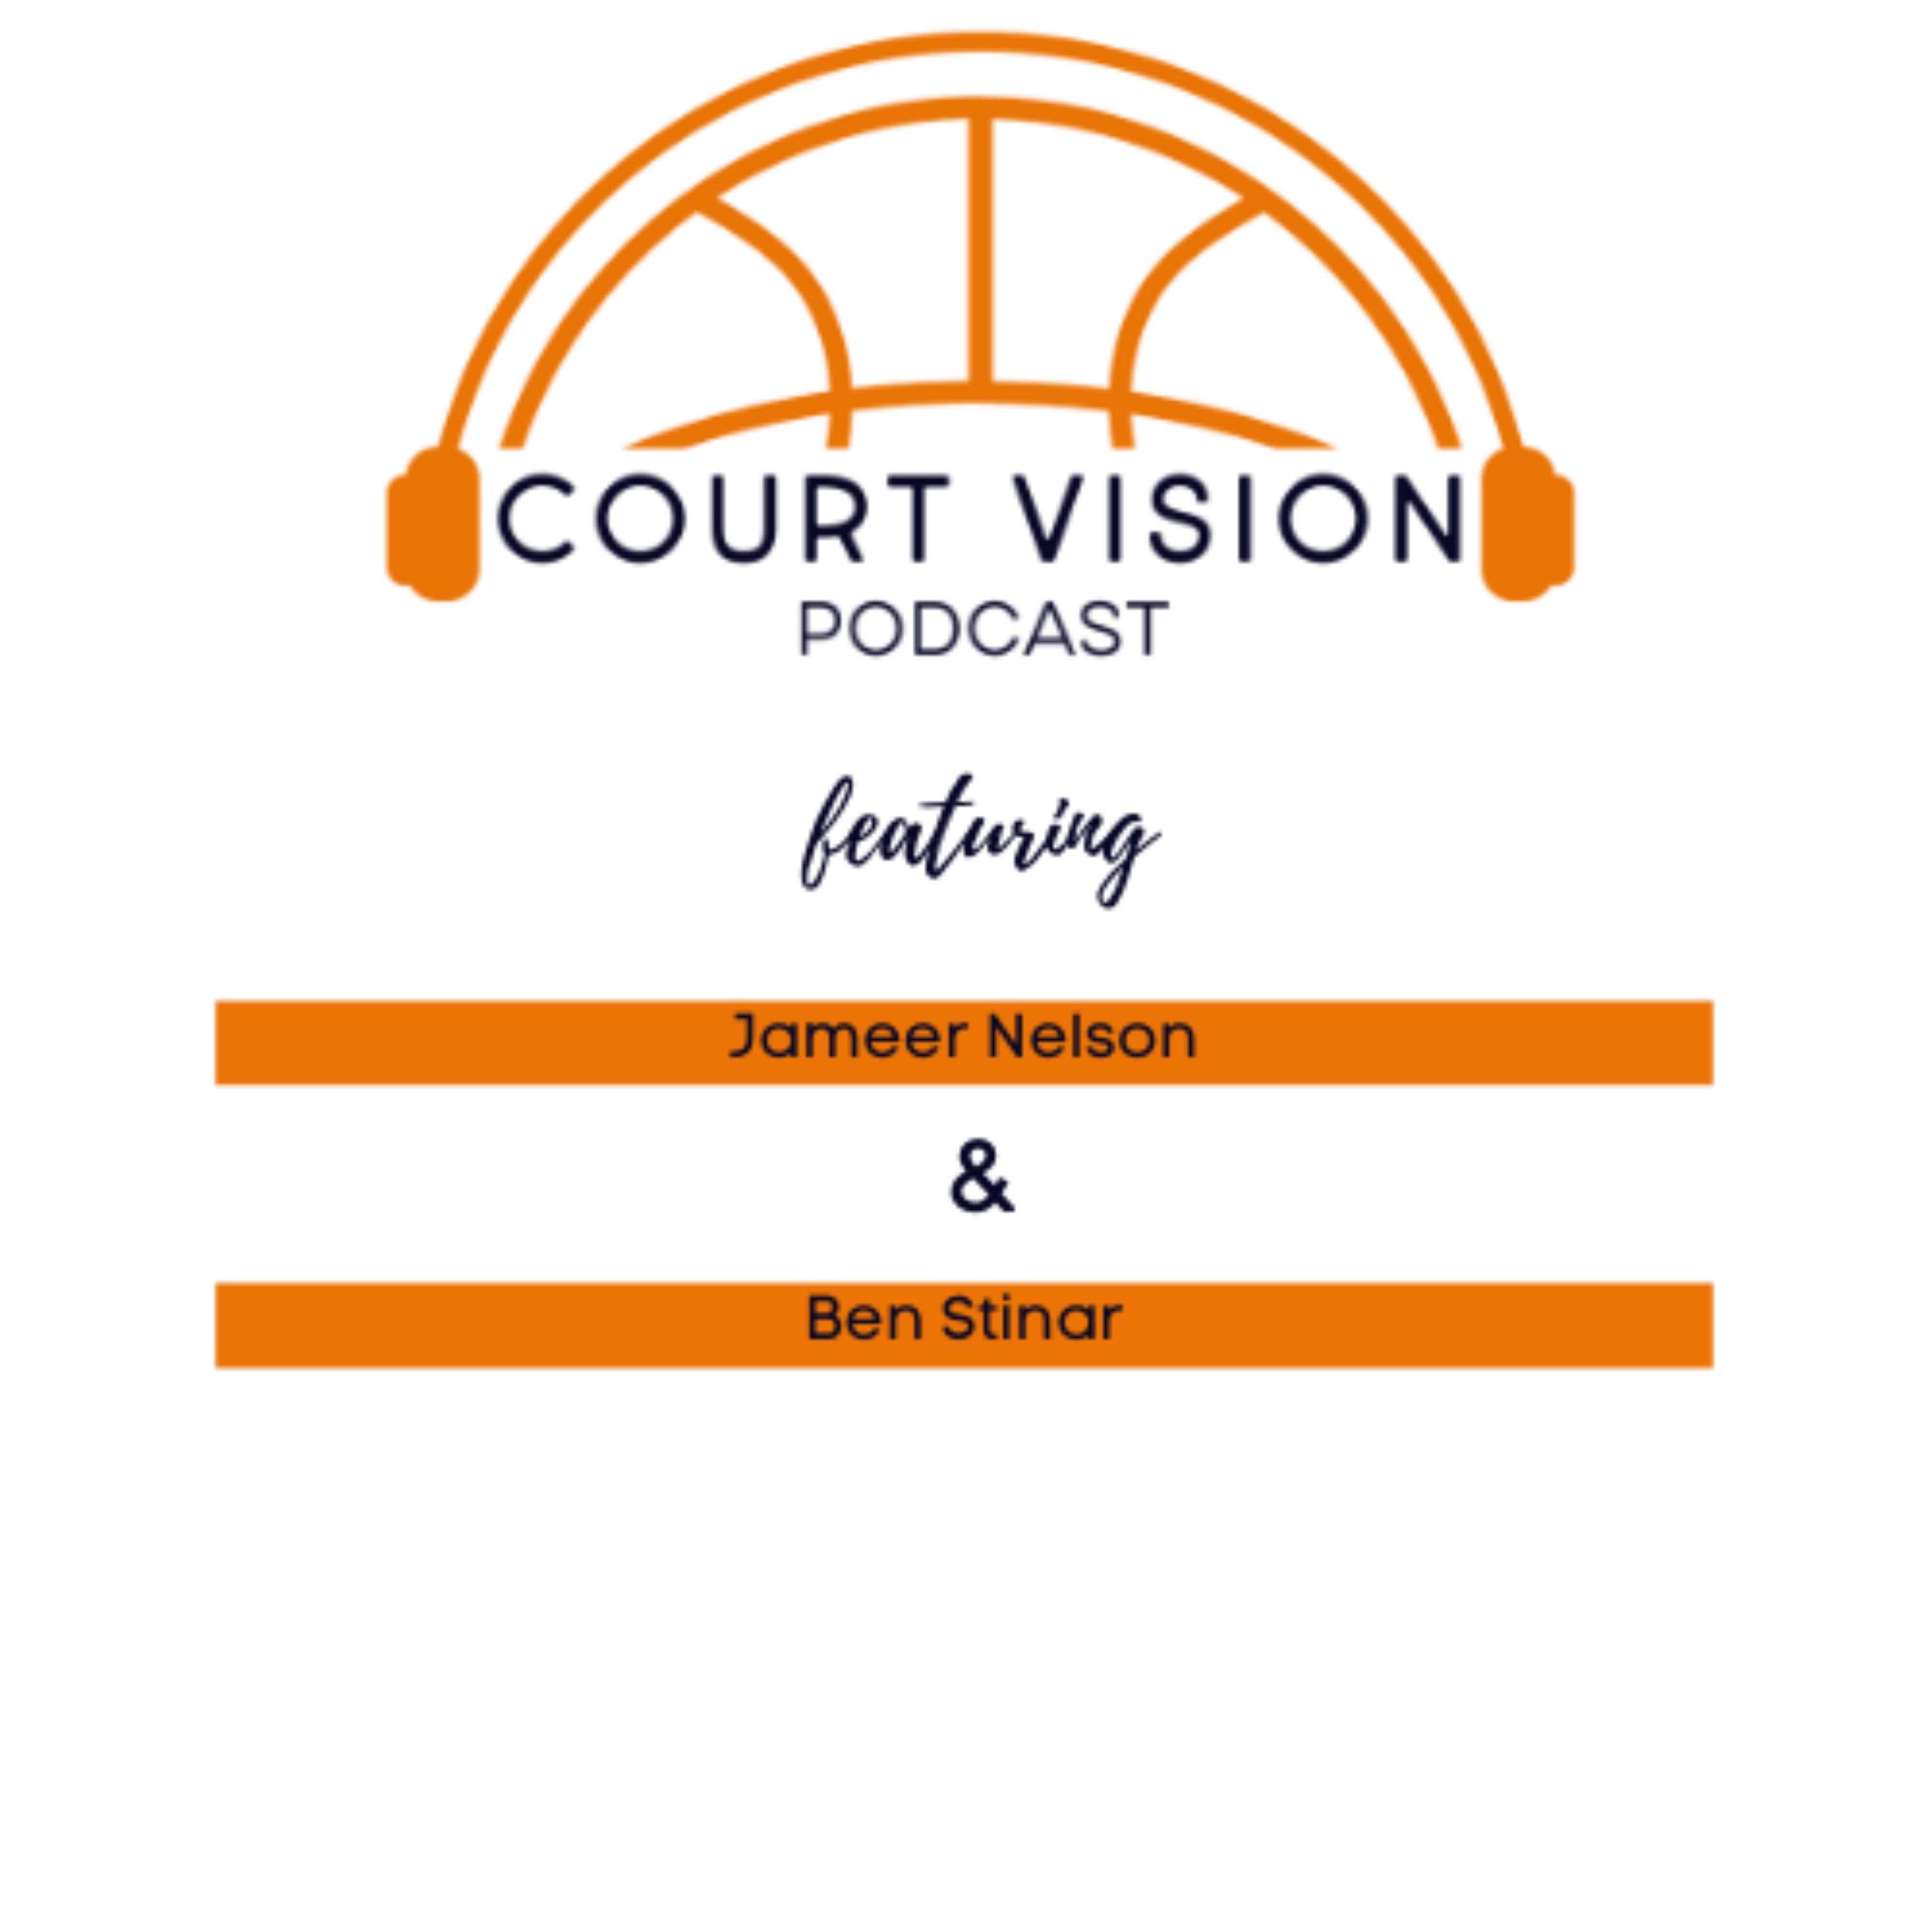 Mo Williams | Court Vision Podcast with Jameer Nelson and Ben Stinar - burst 07